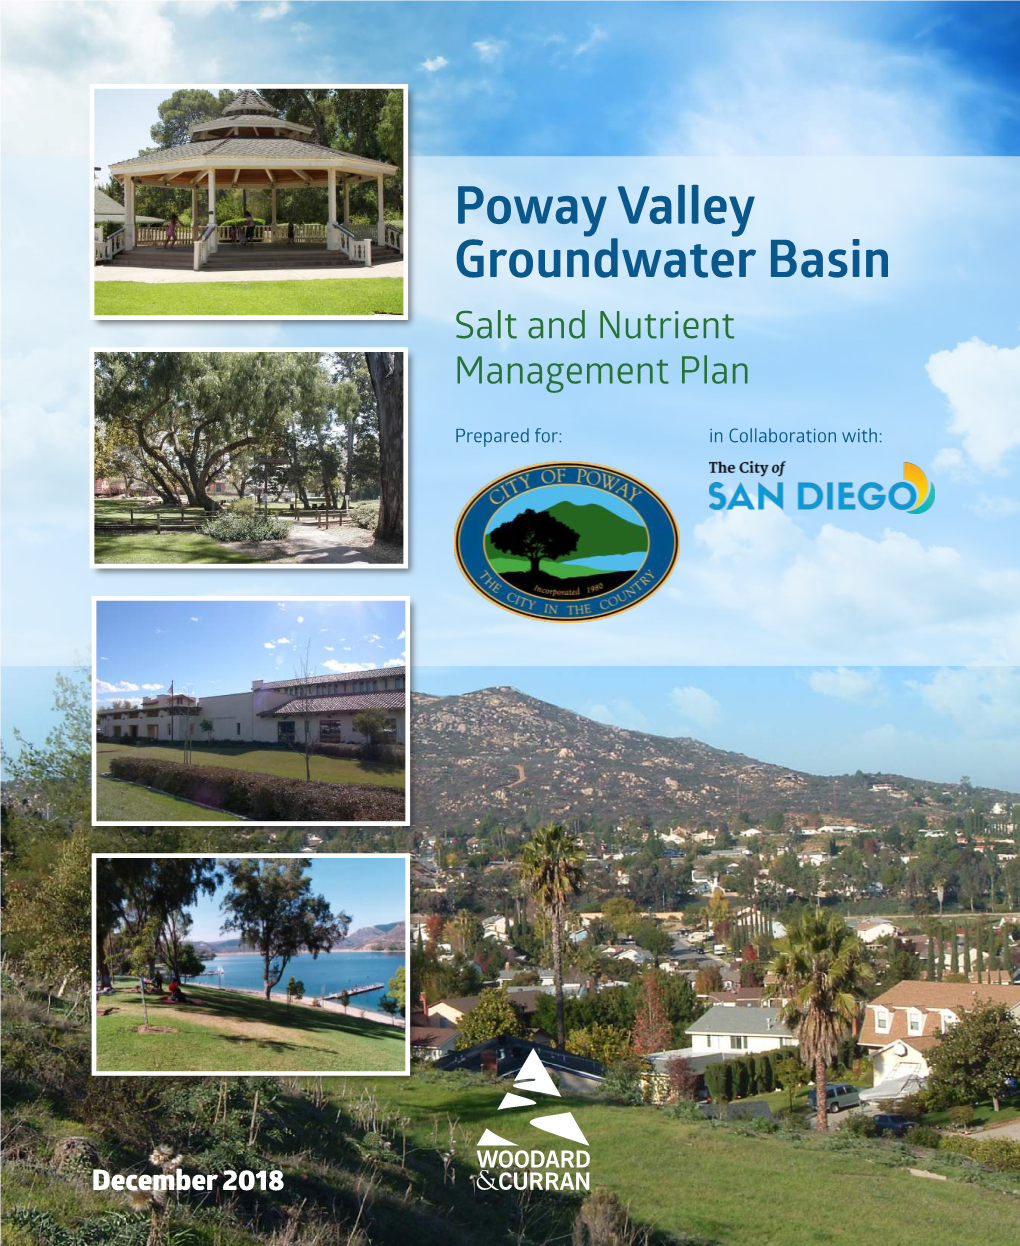 Poway Valley Groundwater Basin Salt and Nutrient Management Plan